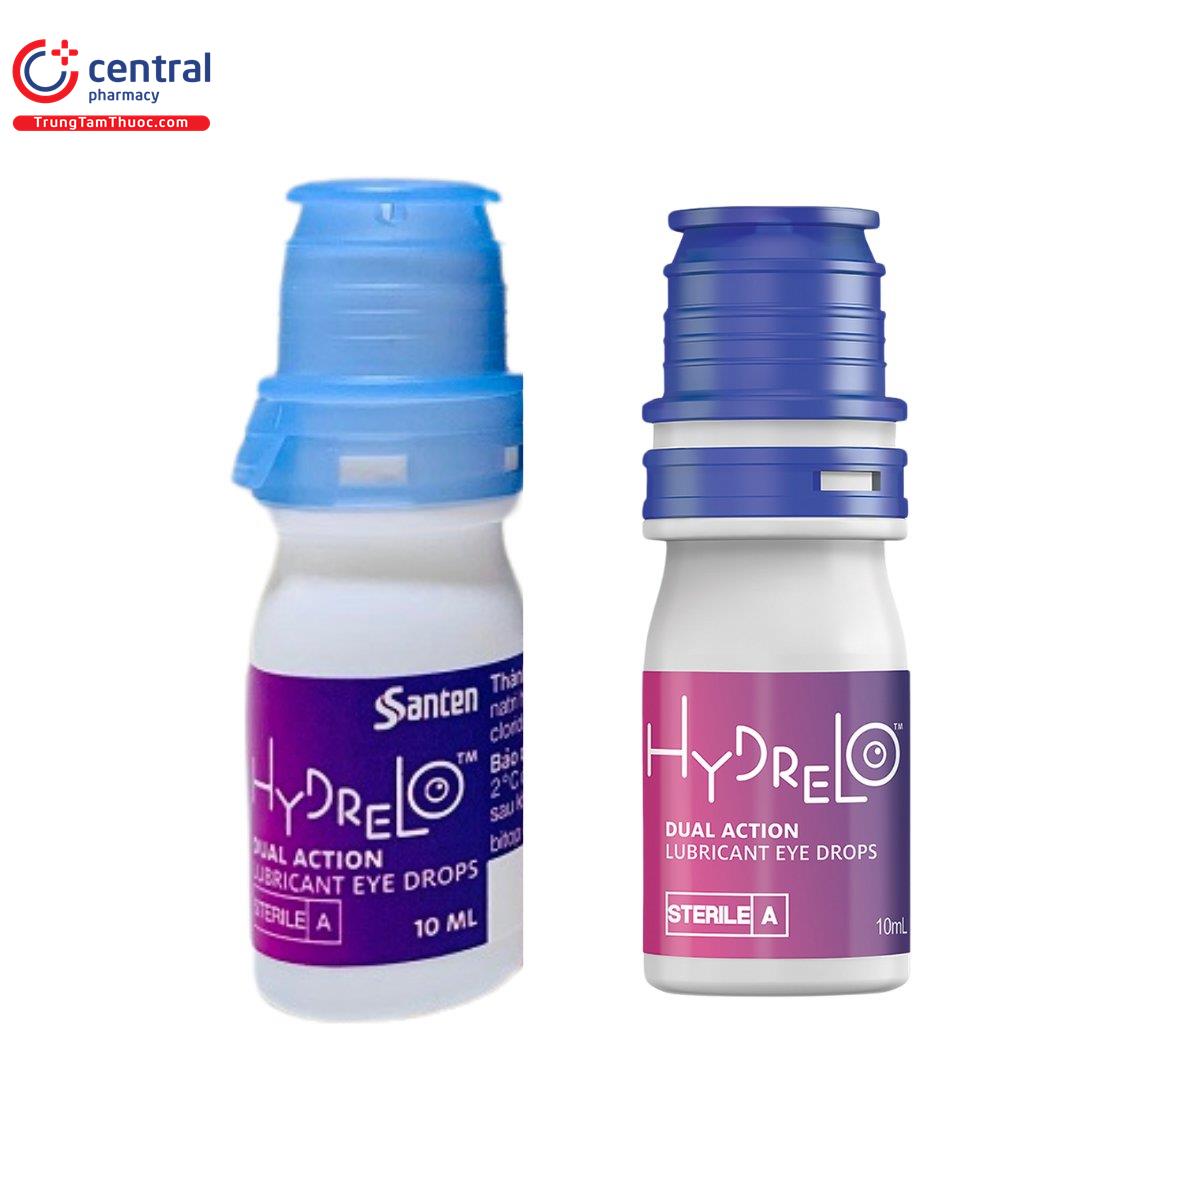 hydrelo dual action 10ml 7 T8618